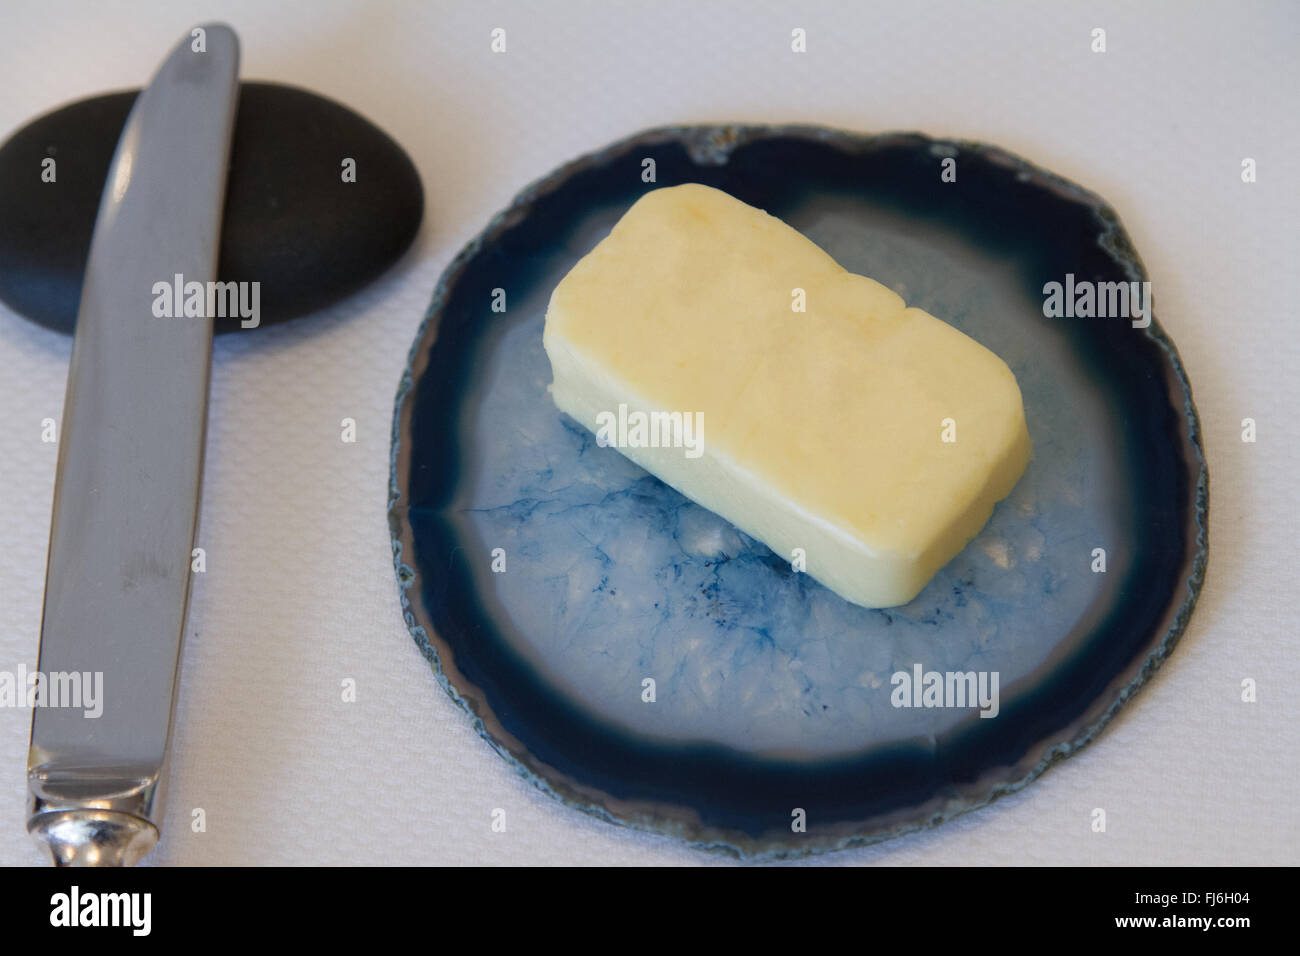 French butter Stock Photo